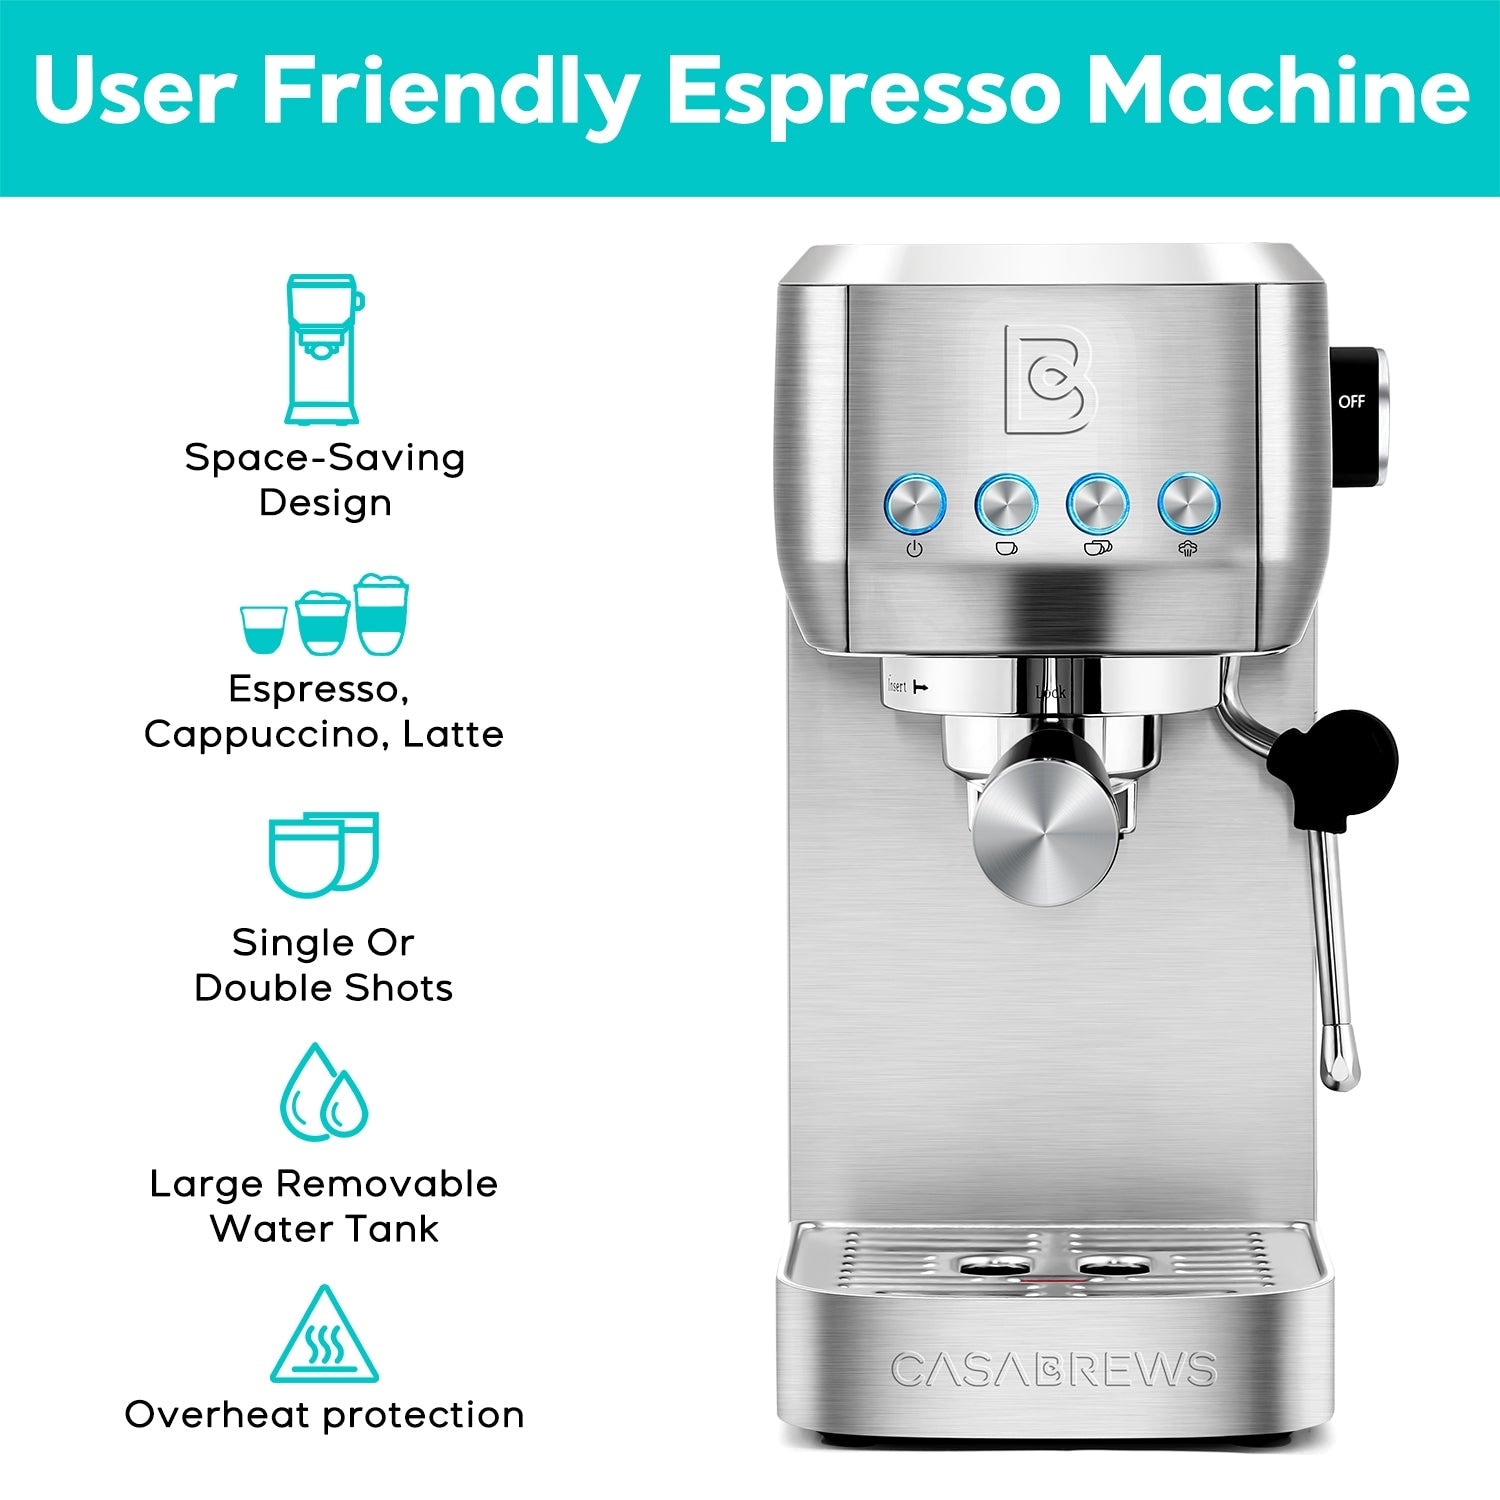 https://ak1.ostkcdn.com/images/products/is/images/direct/e48f76bbd45d55f73b3ab96bd449ba568113ad74/Casabrews-20-Bar-Espresso-Coffee-Machine-with-Space-Saving-Design.jpg